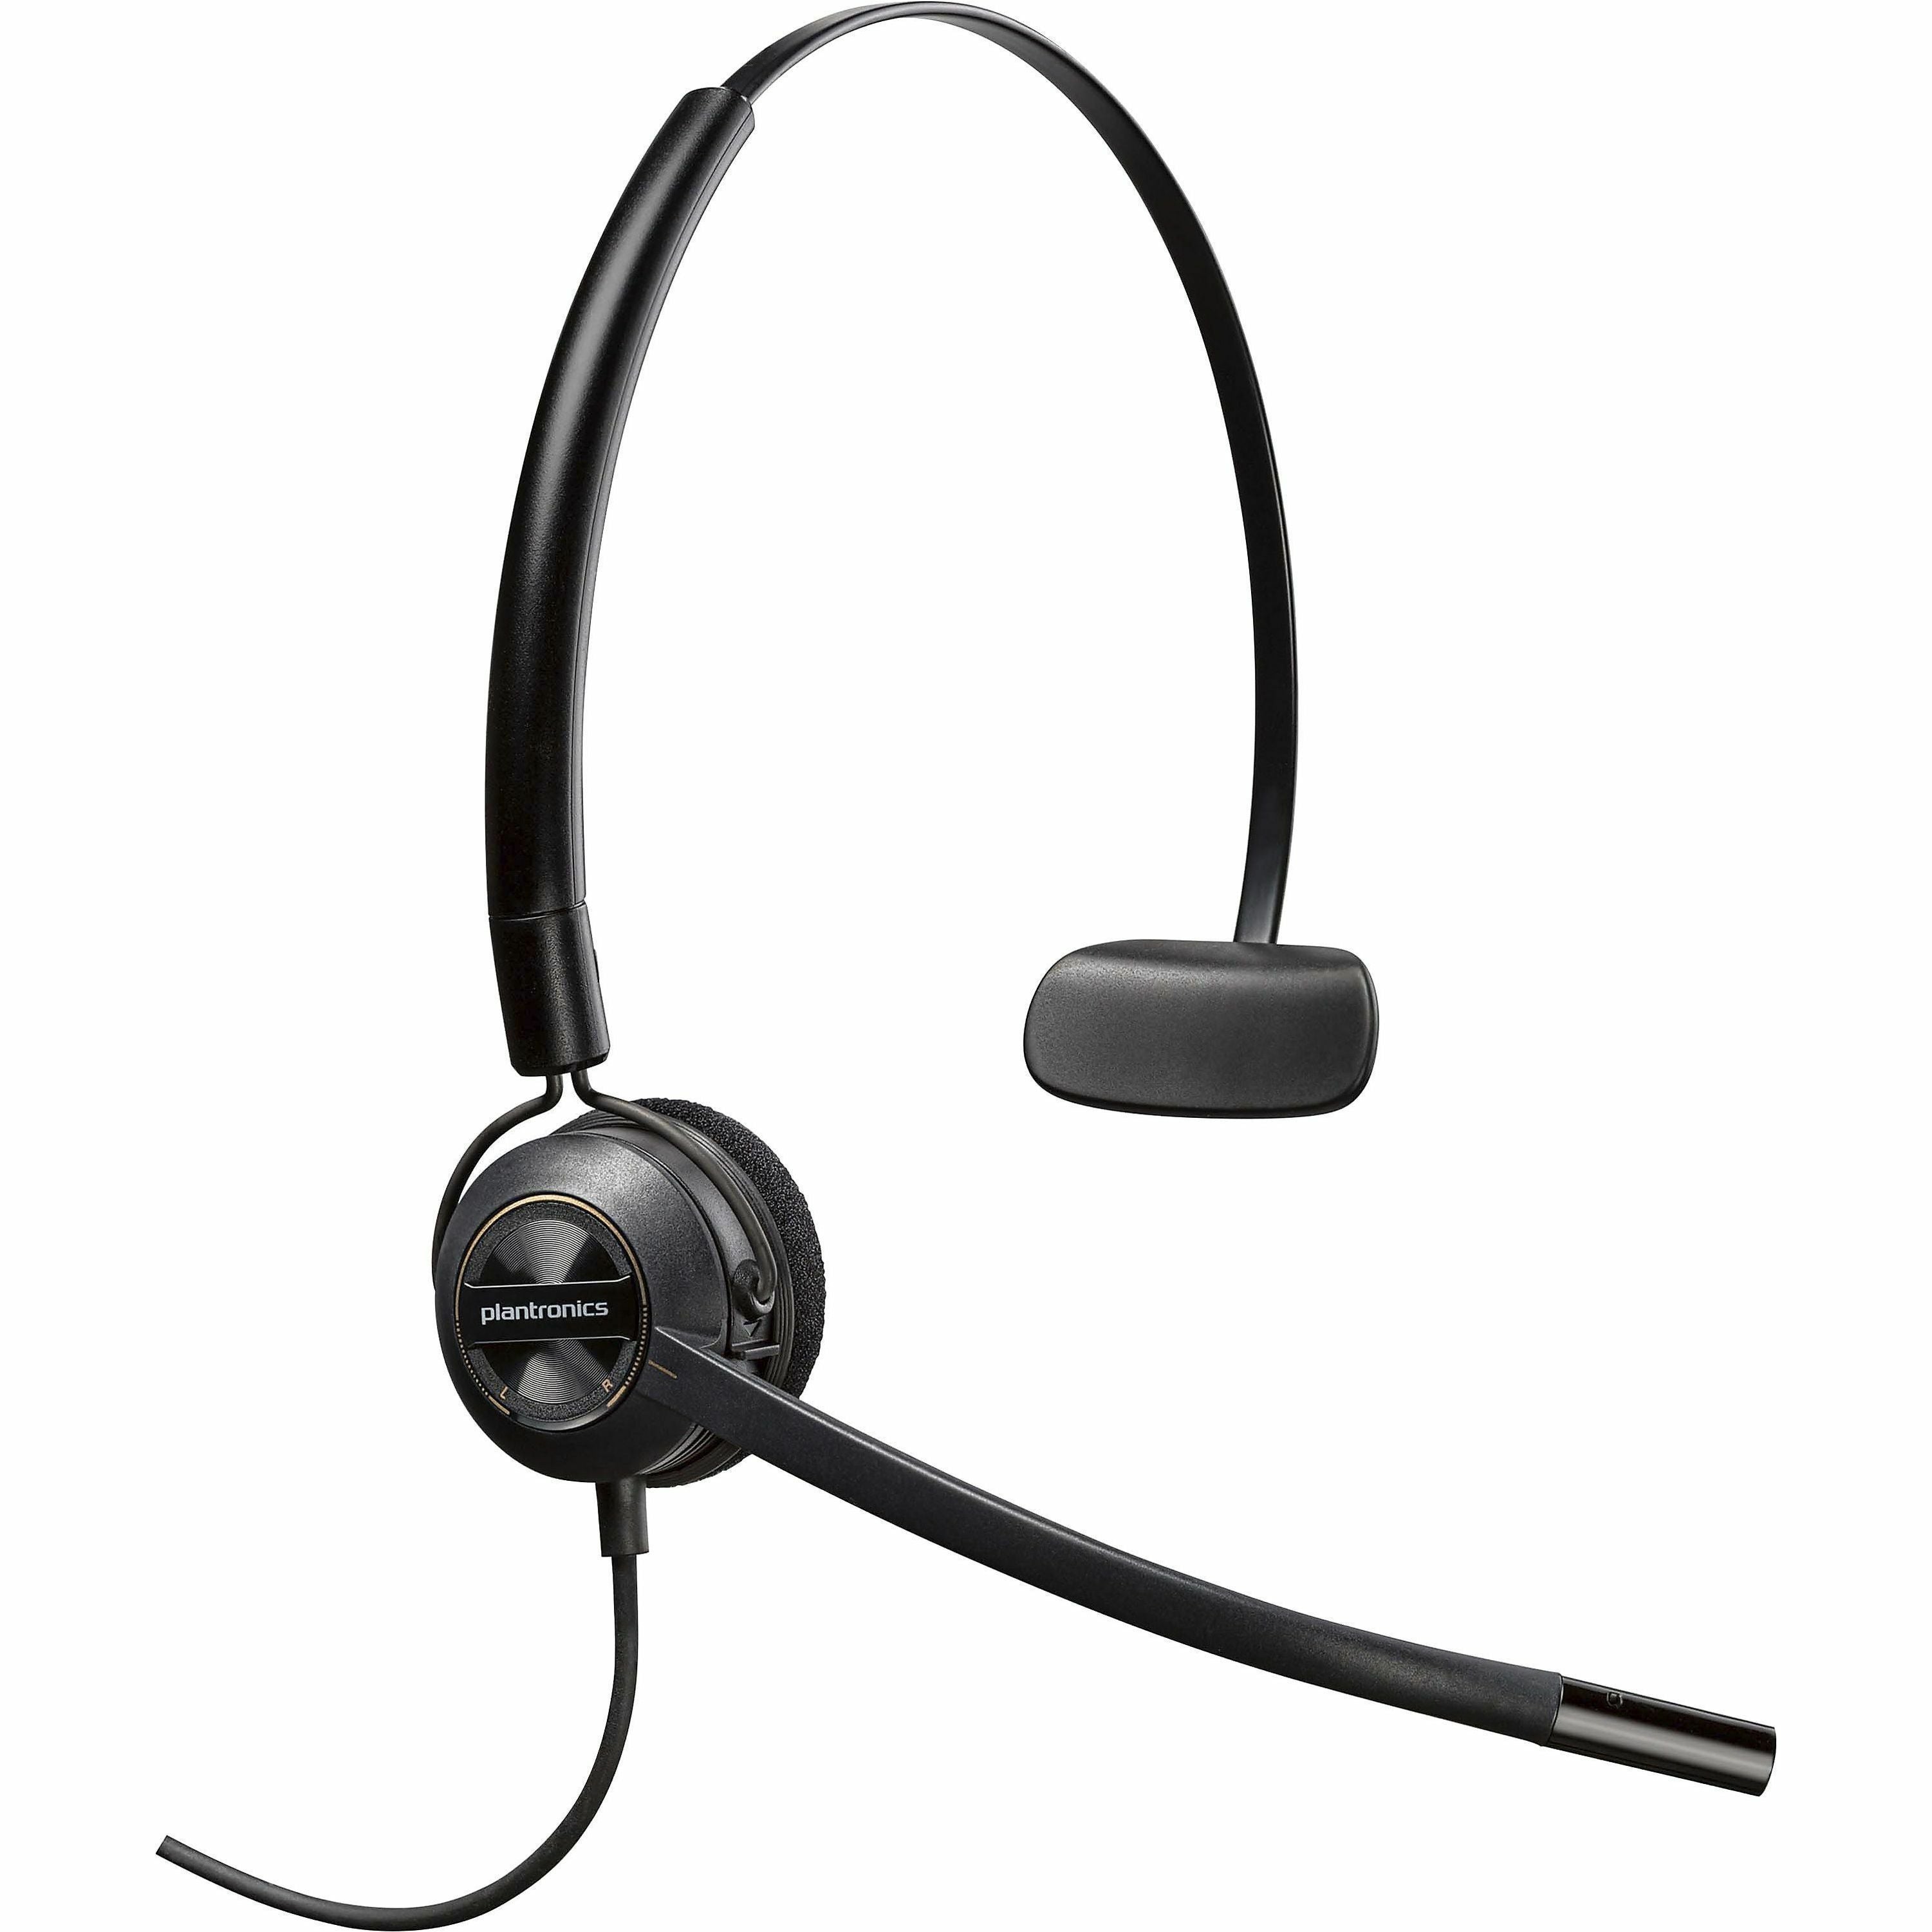 Poly EncorePro HW540 Convertible Headset - Mono - Mini-phone (3.5mm) - Wired - 20 Hz - 16 kHz - On-ear - Monaural - Ear-cup - 2.92 ft Cable - Omni-directional, Noise Cancelling Microphone - Black - 2